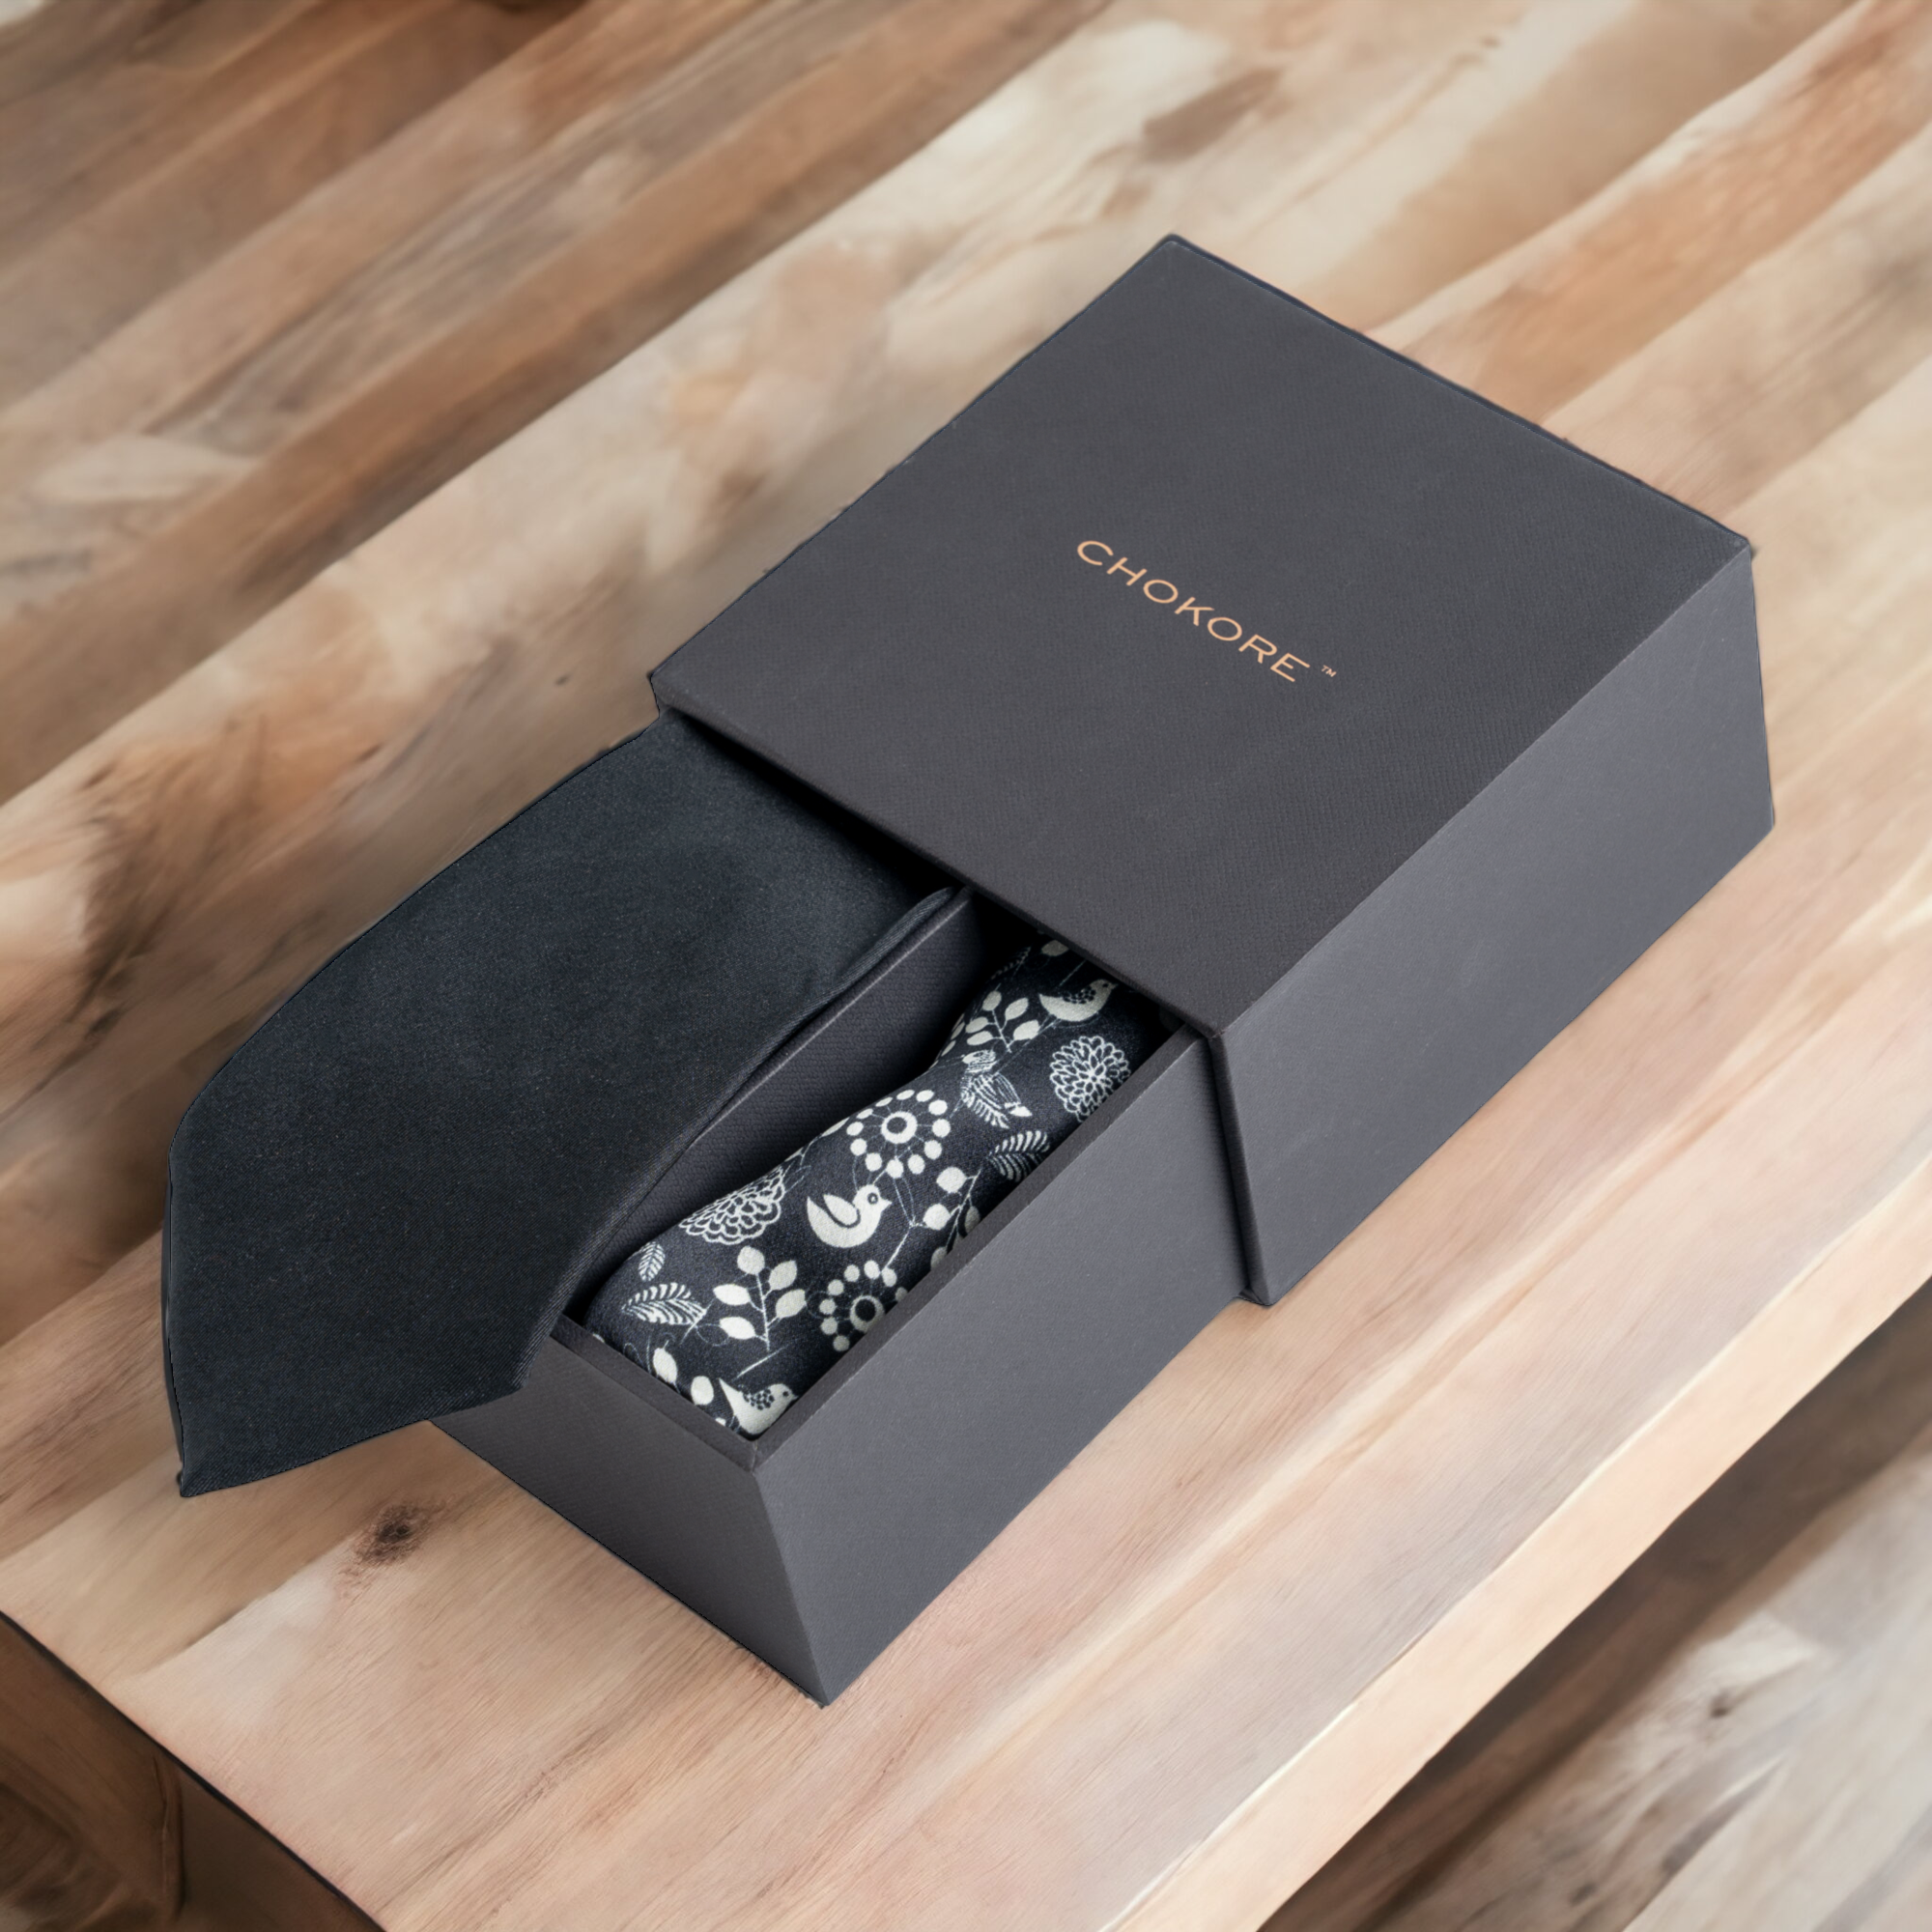 Chokore Special 2-in-1 Black Gift Set (Pocket Square & Tie)